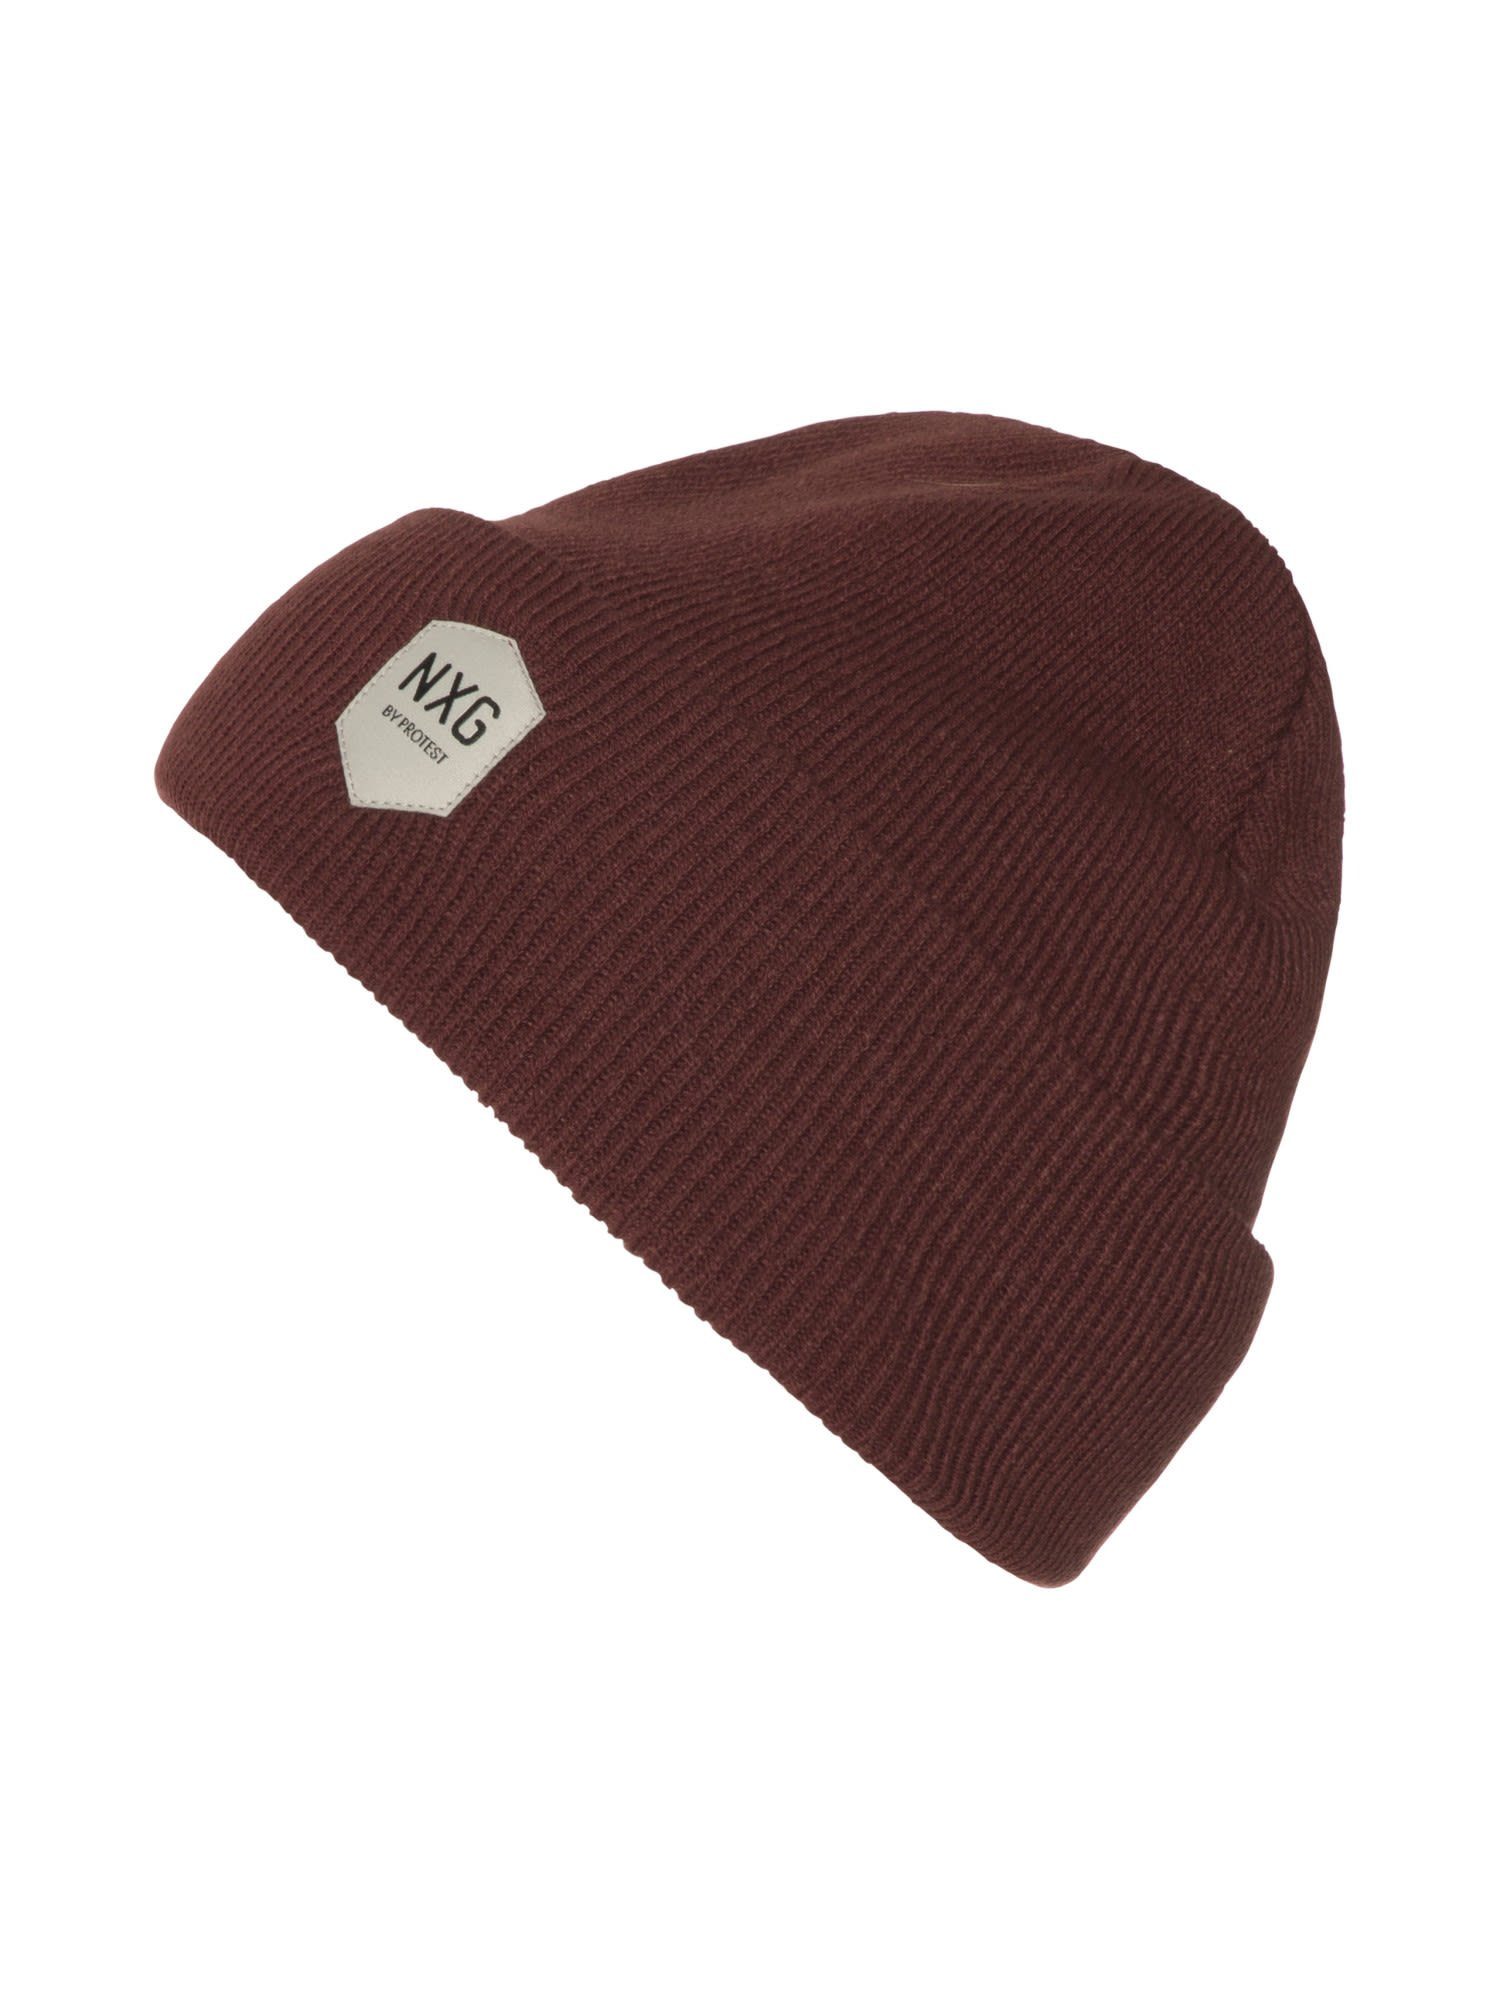 Beanie Accessoires Rebelly Oxblood Nxg Beanie Protest Protest